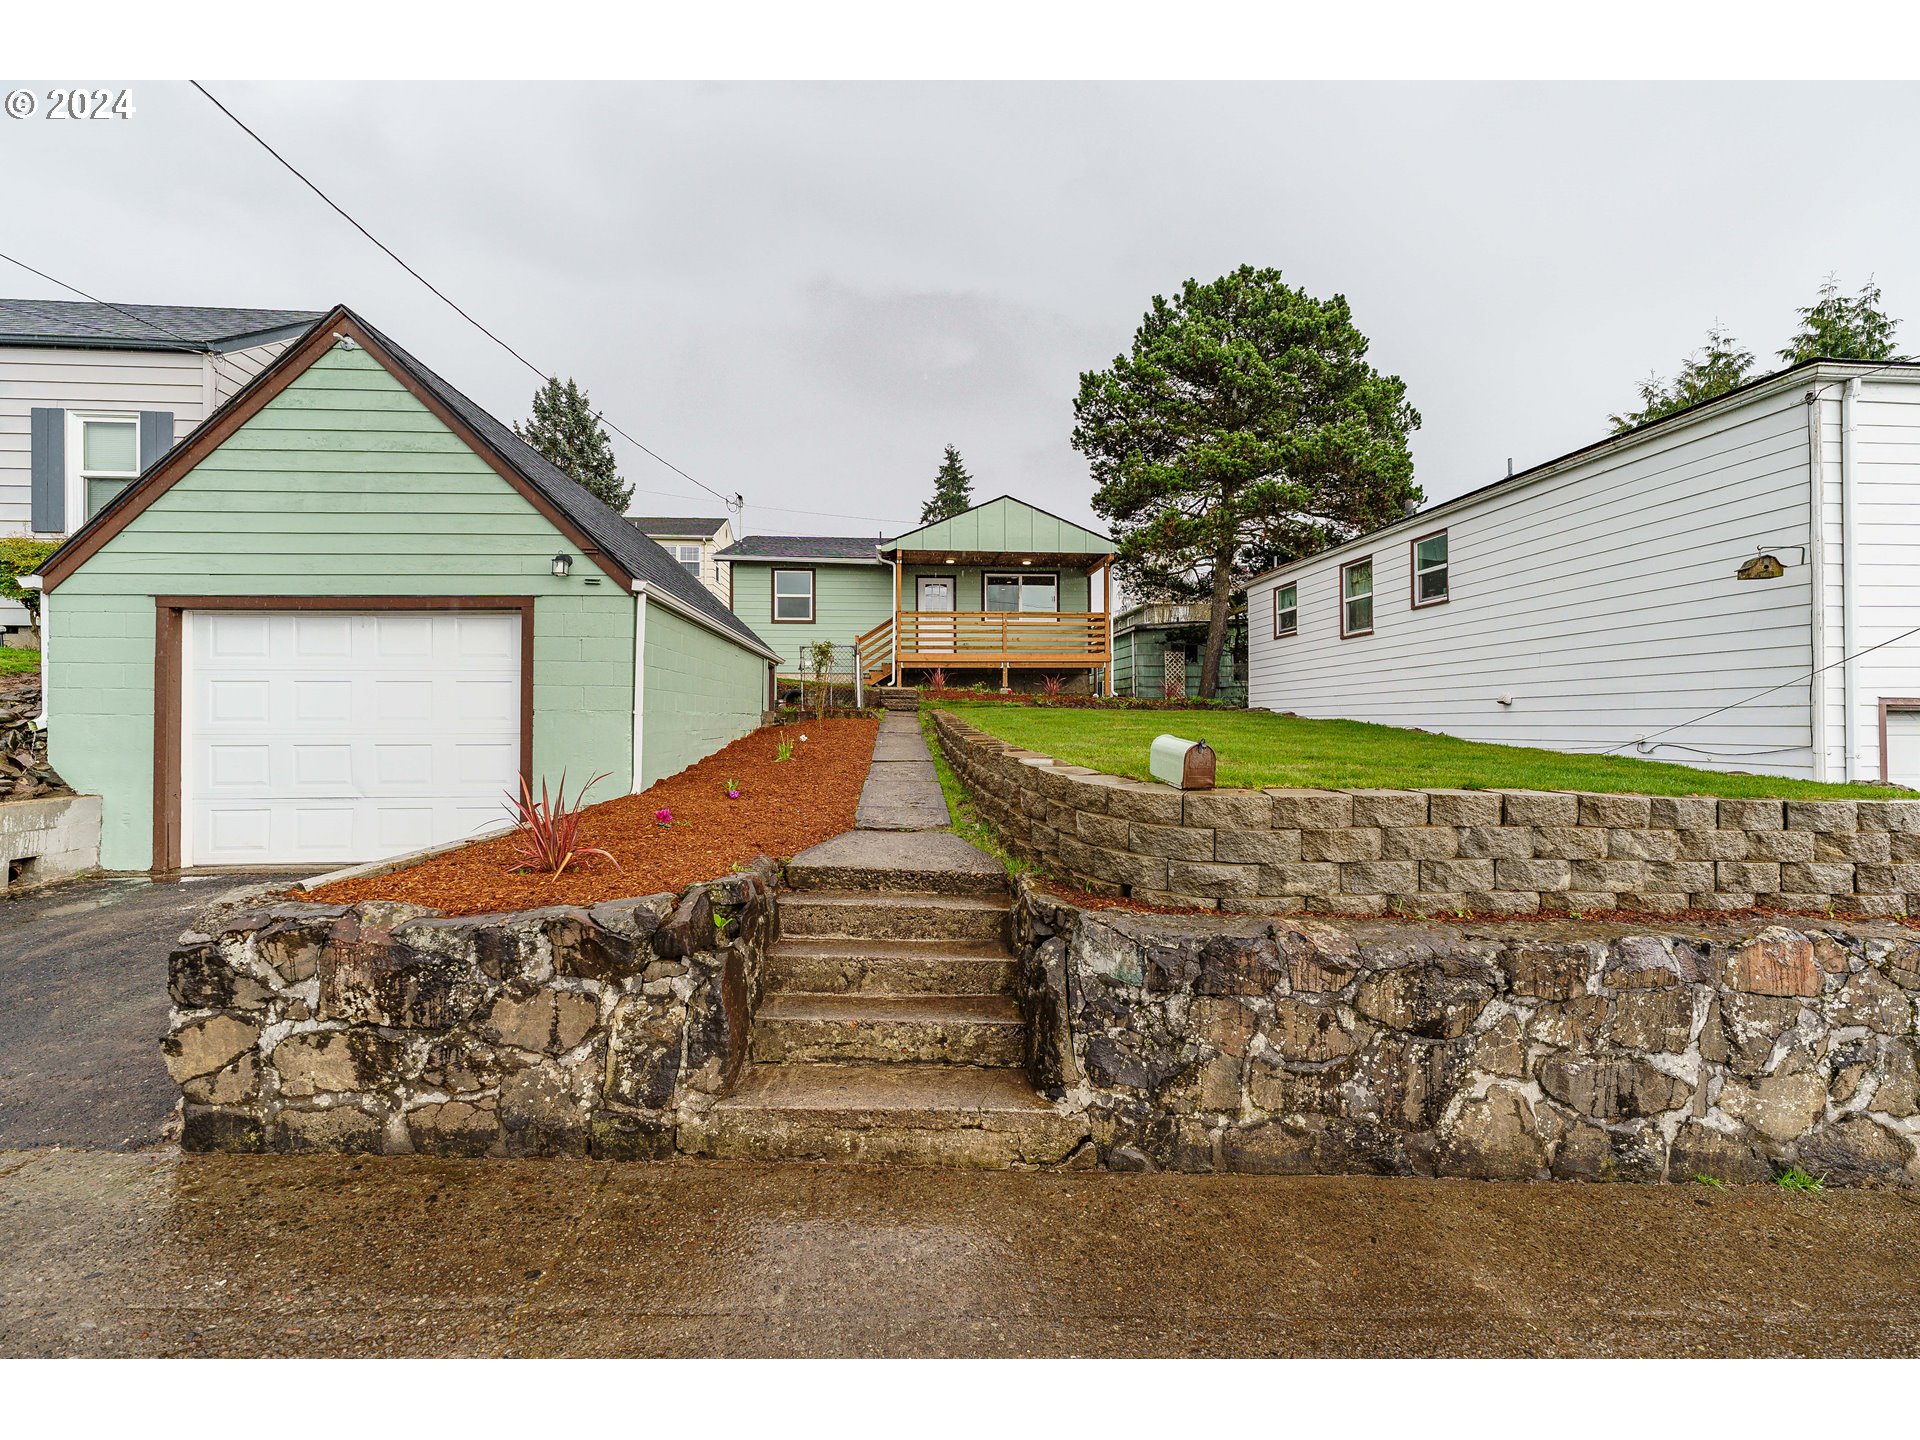 404 N 5TH AVE, Kelso, WA 